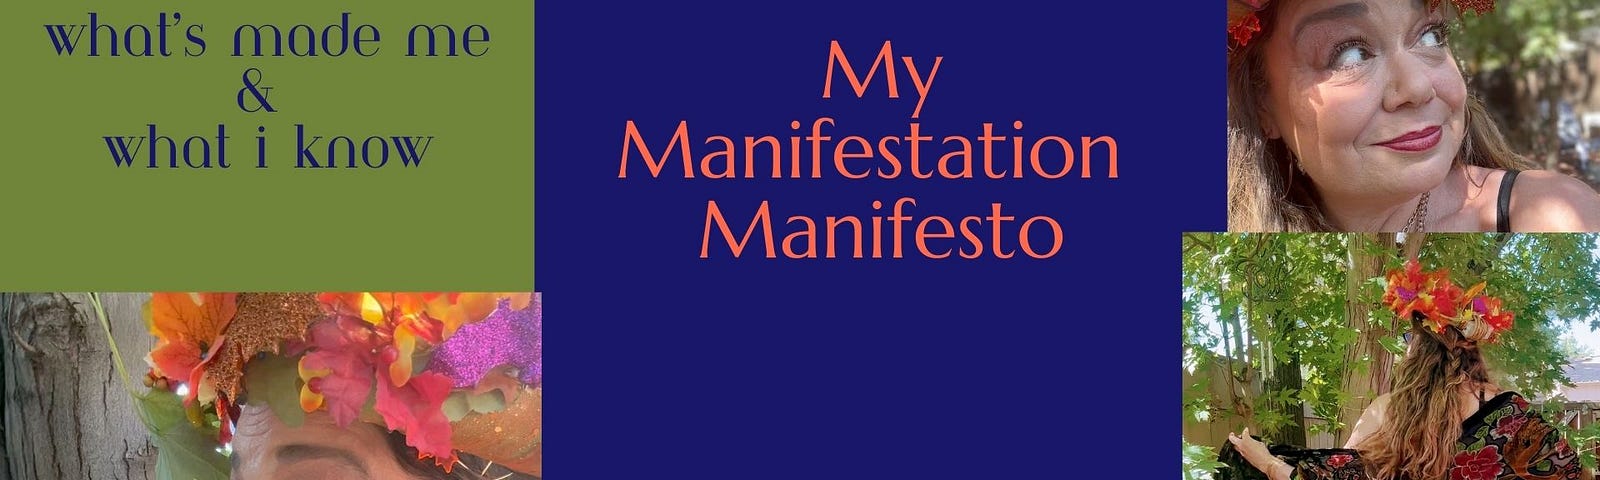 Six blocks; 3 of them contain images of the same middle-aged woman in an autumnal setting. The other 3 blocks read: “My Manifestation Manifesto” “What’s made me & what I know” & “What I’m manifesting”